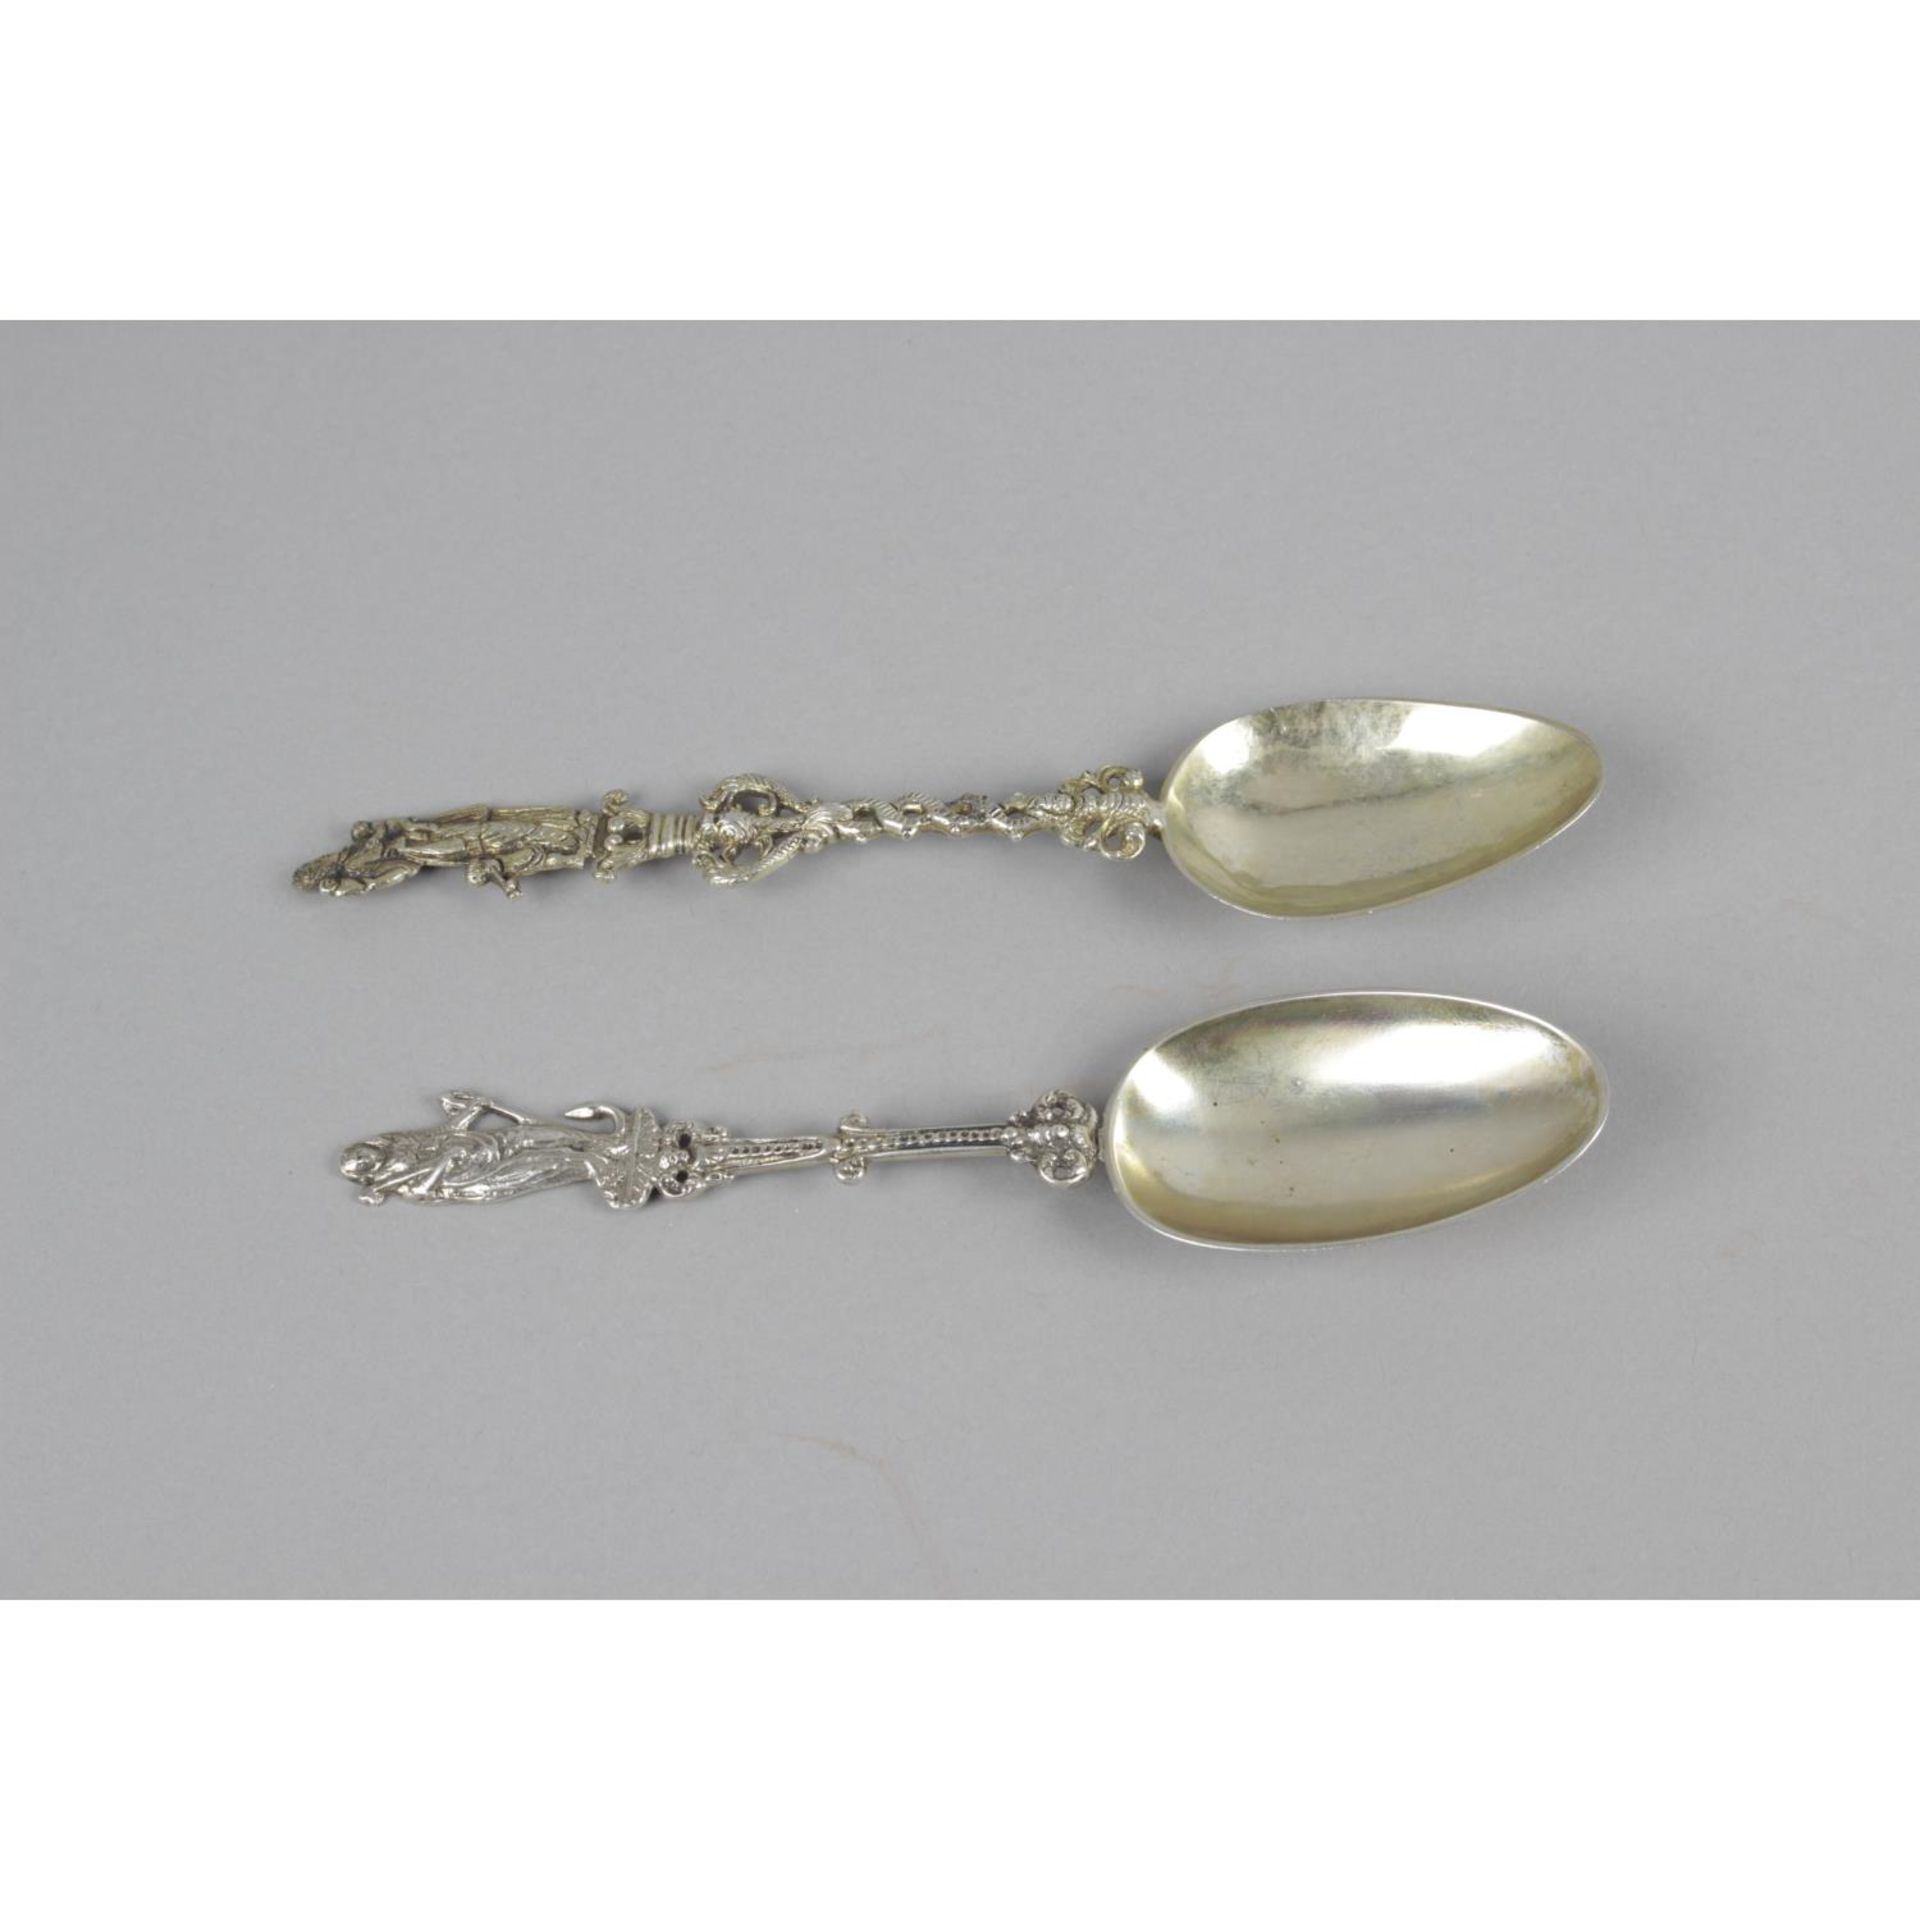 A set of six Apostle spoons, - Image 5 of 6